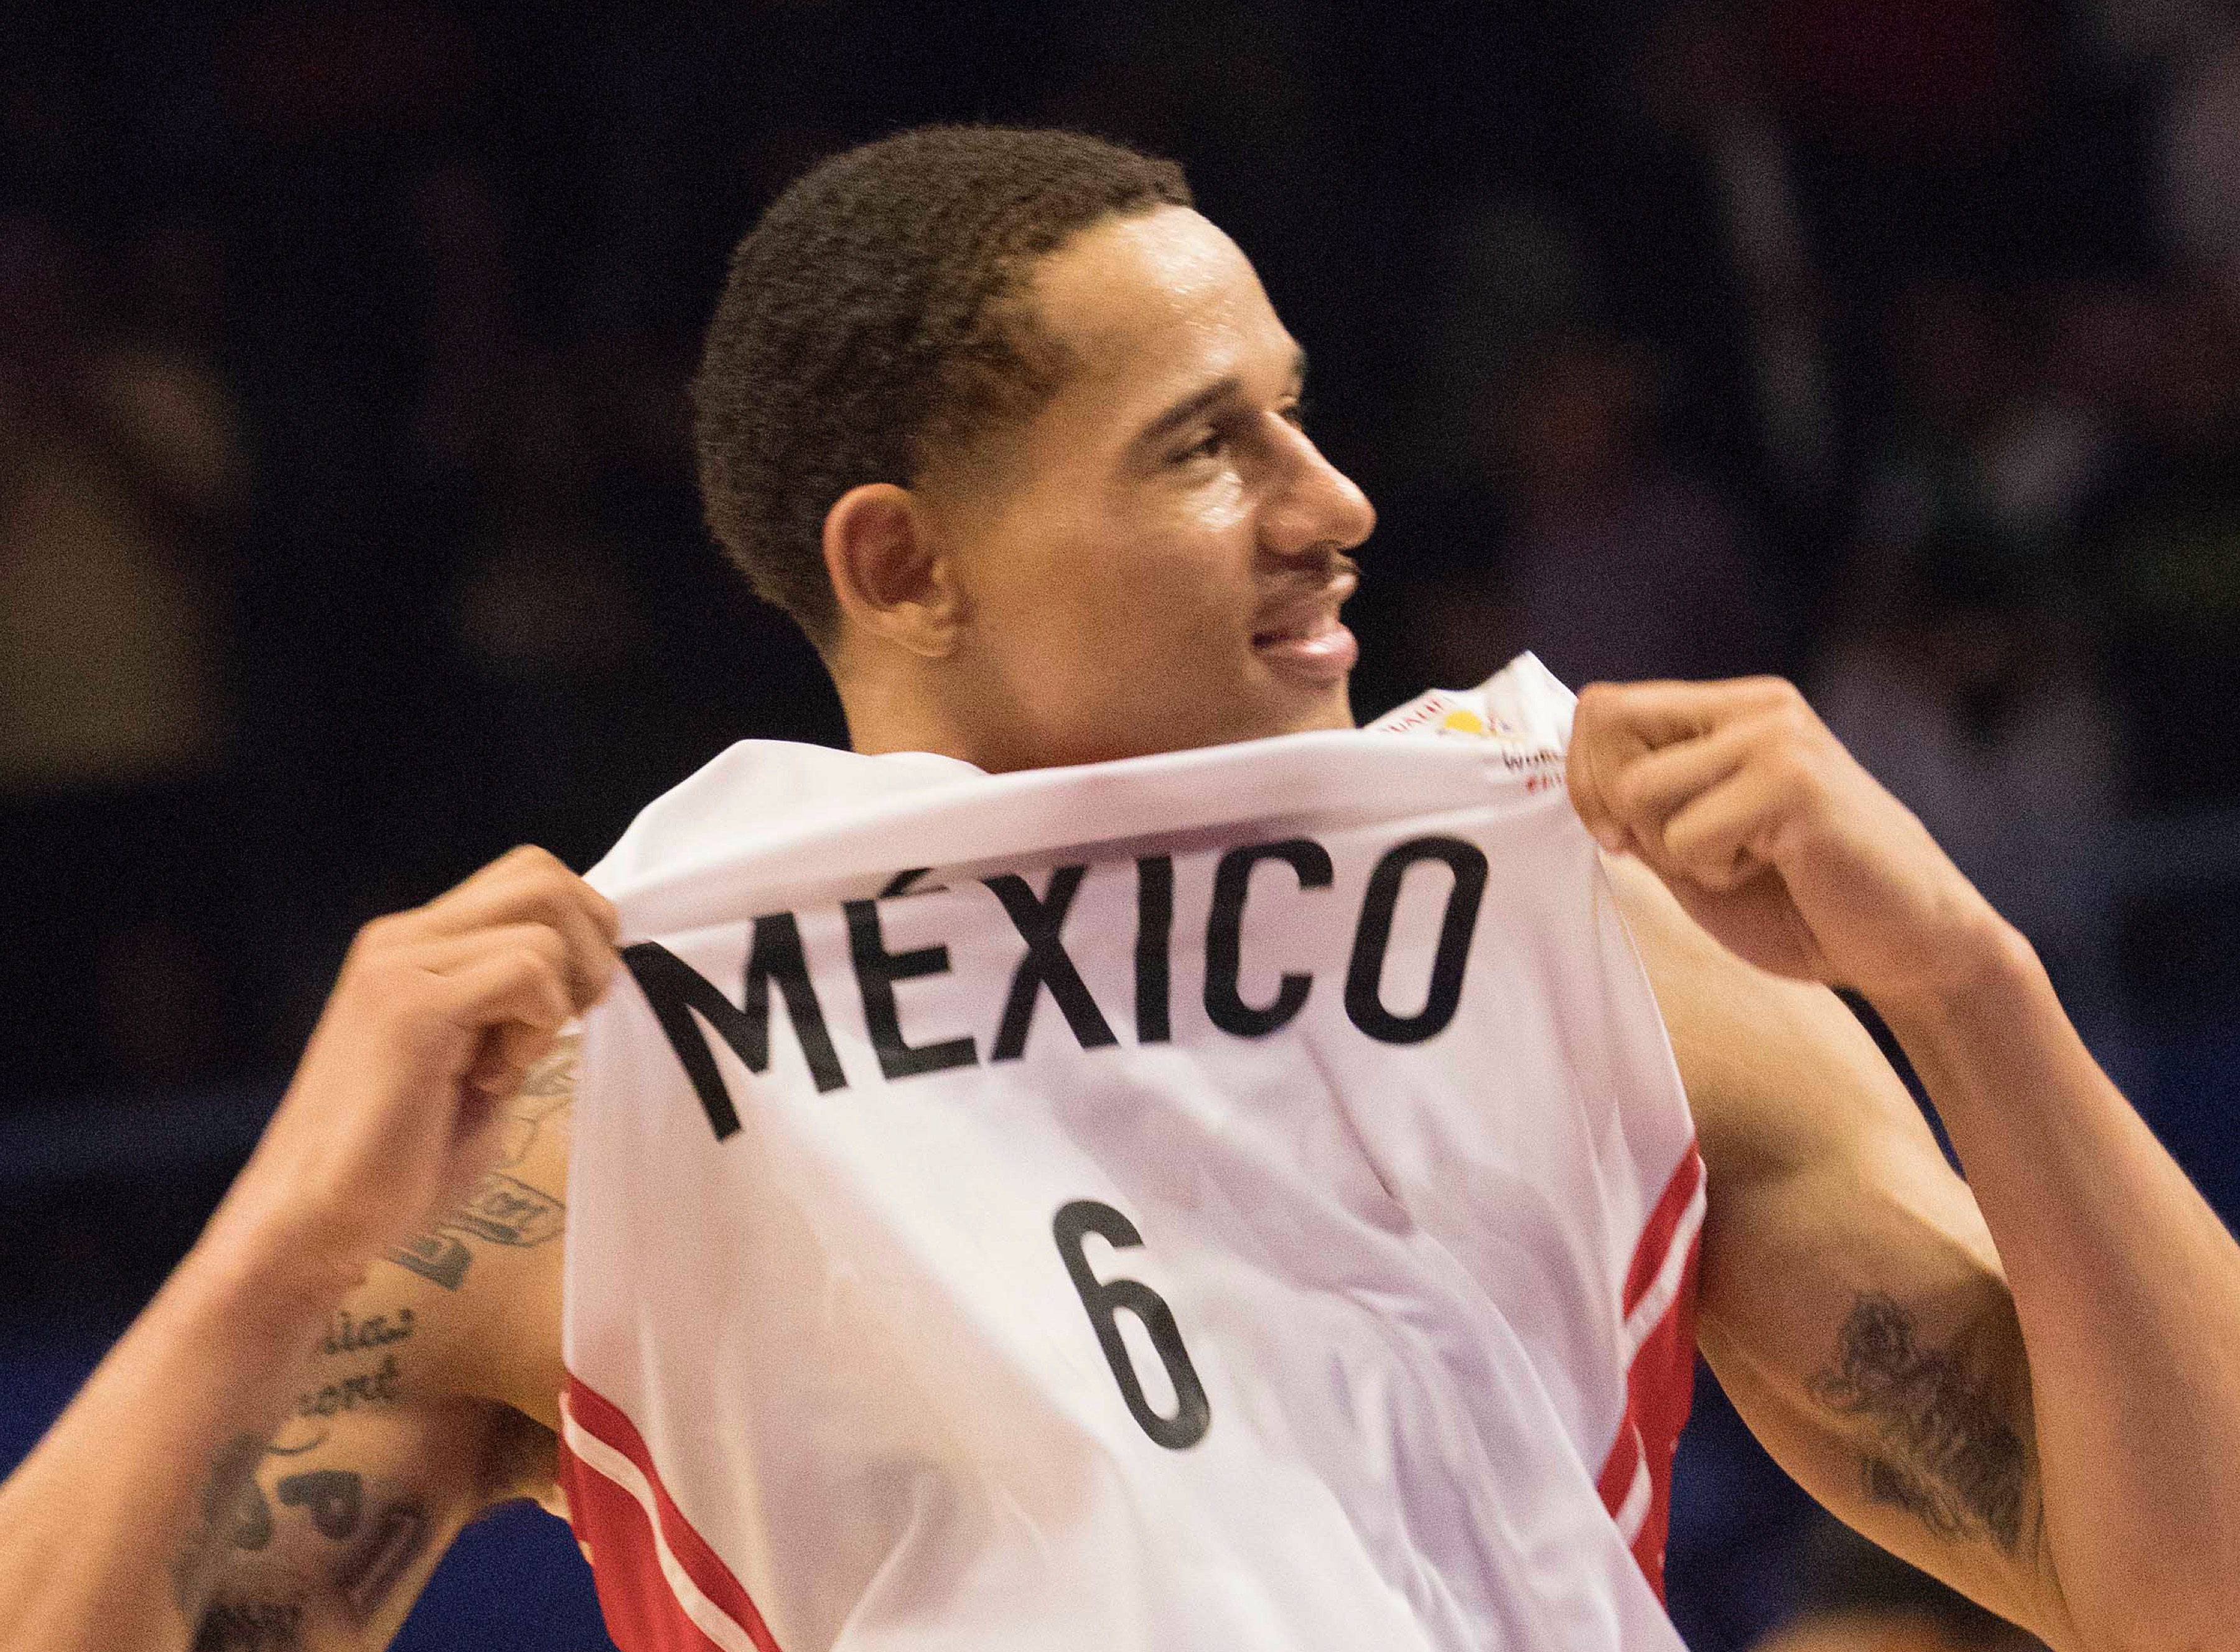 Mexico's Juan Toscano celebrates his team's victory over the U.S. at a regular season FIBA basketball World Cup qualifier game in Mexico City, Thursday, June 28, 2018.